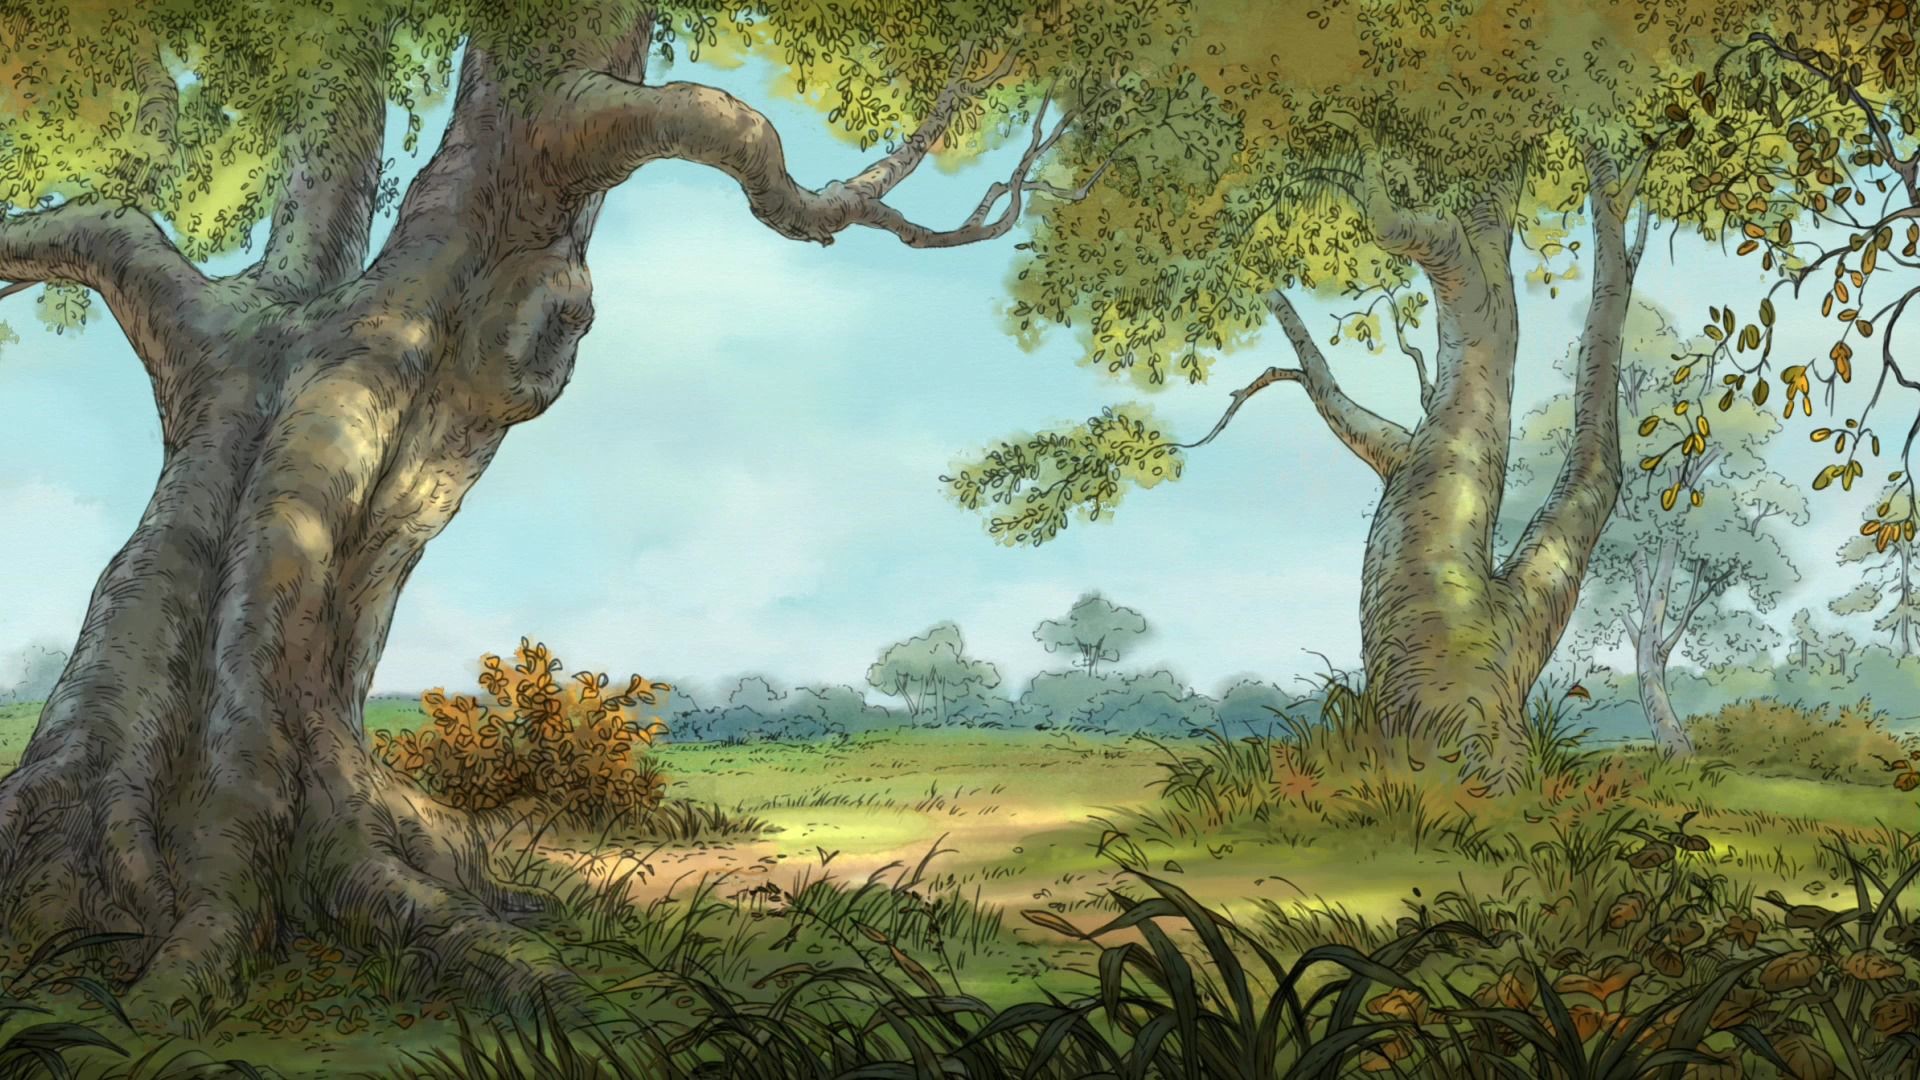 1920x1080 Winnie-the-pooh Wallpapers | Desktop Wallpapers - Page 2